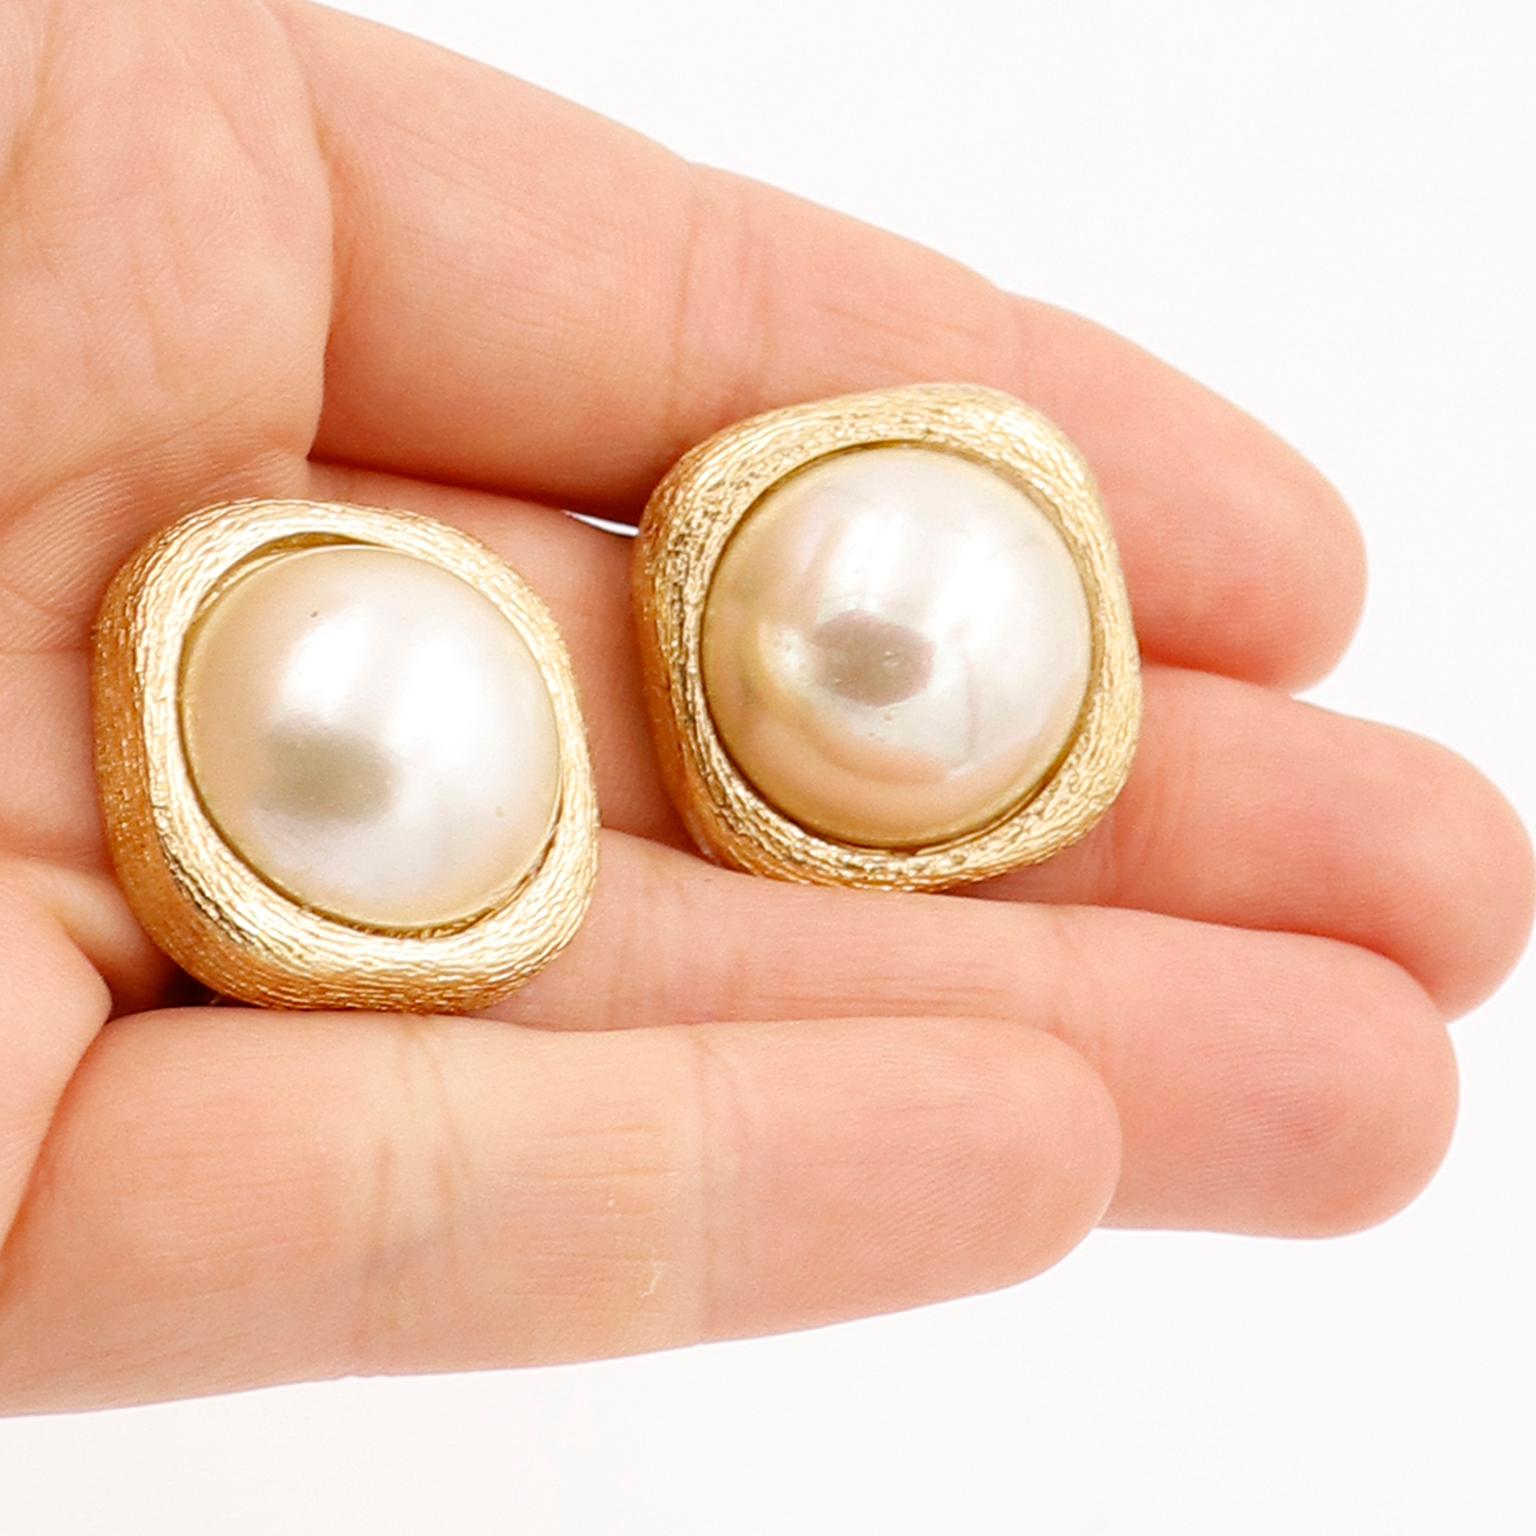 These vintage Christian Dior Earrings are in a textured gold plate with large center faux pearl. We love the earrings that have textured metal as they are so luxe and these measure 1